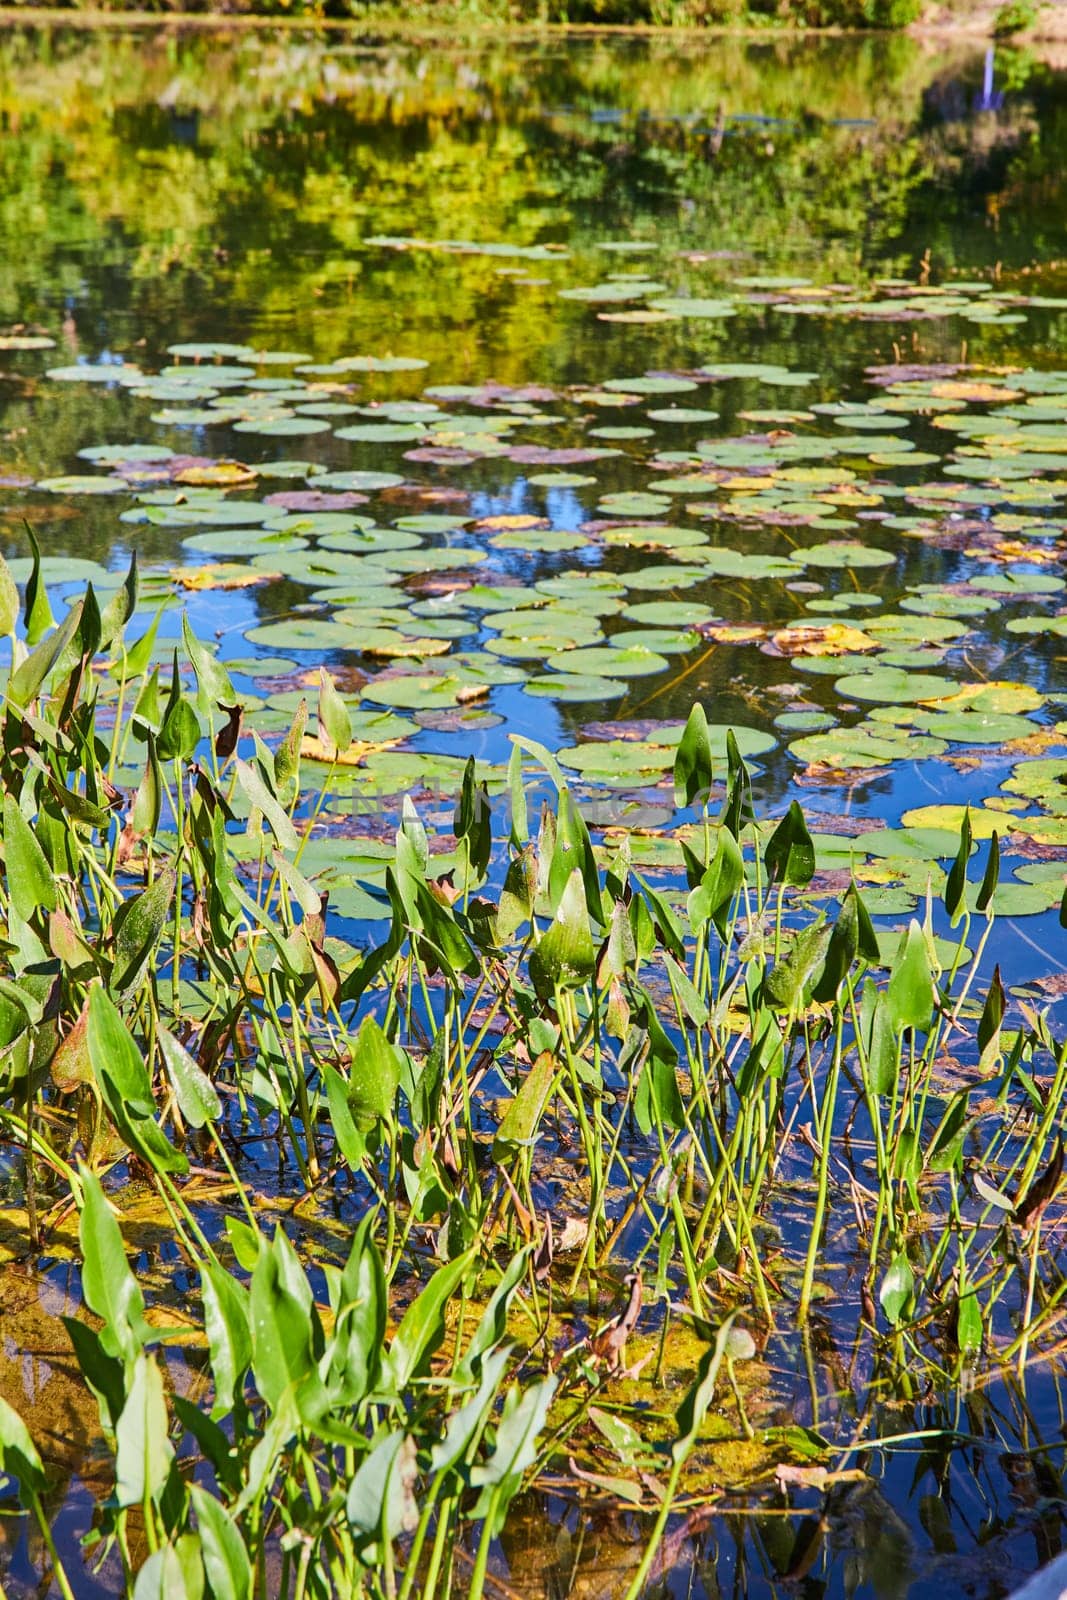 Serene Freshwater Pond with Arrowhead Leaves and Lily Pads, Eye-Level View by njproductions